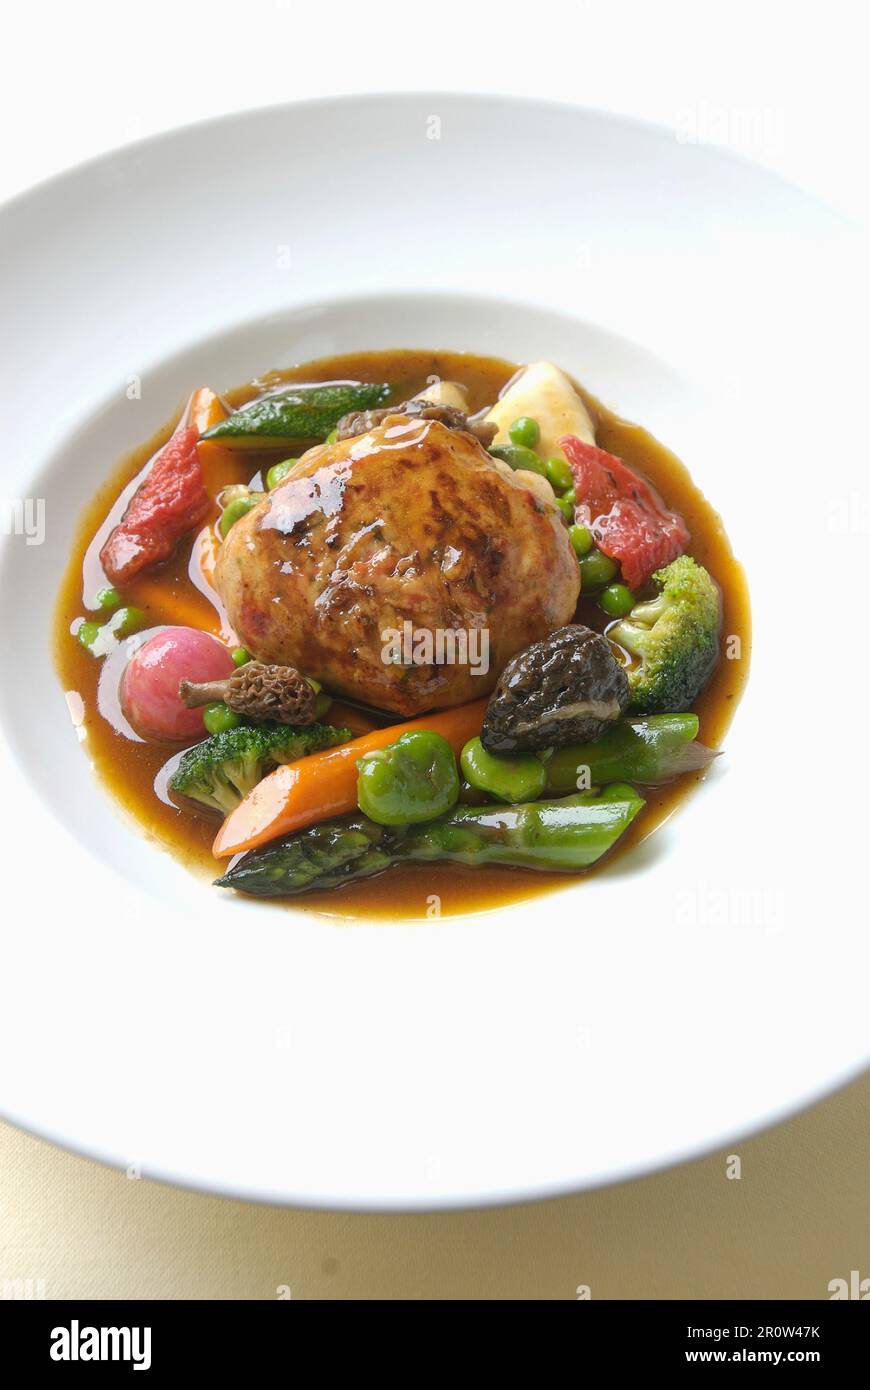 Stuffed veal Caillette with gravy and spring vegetables Stock Photo